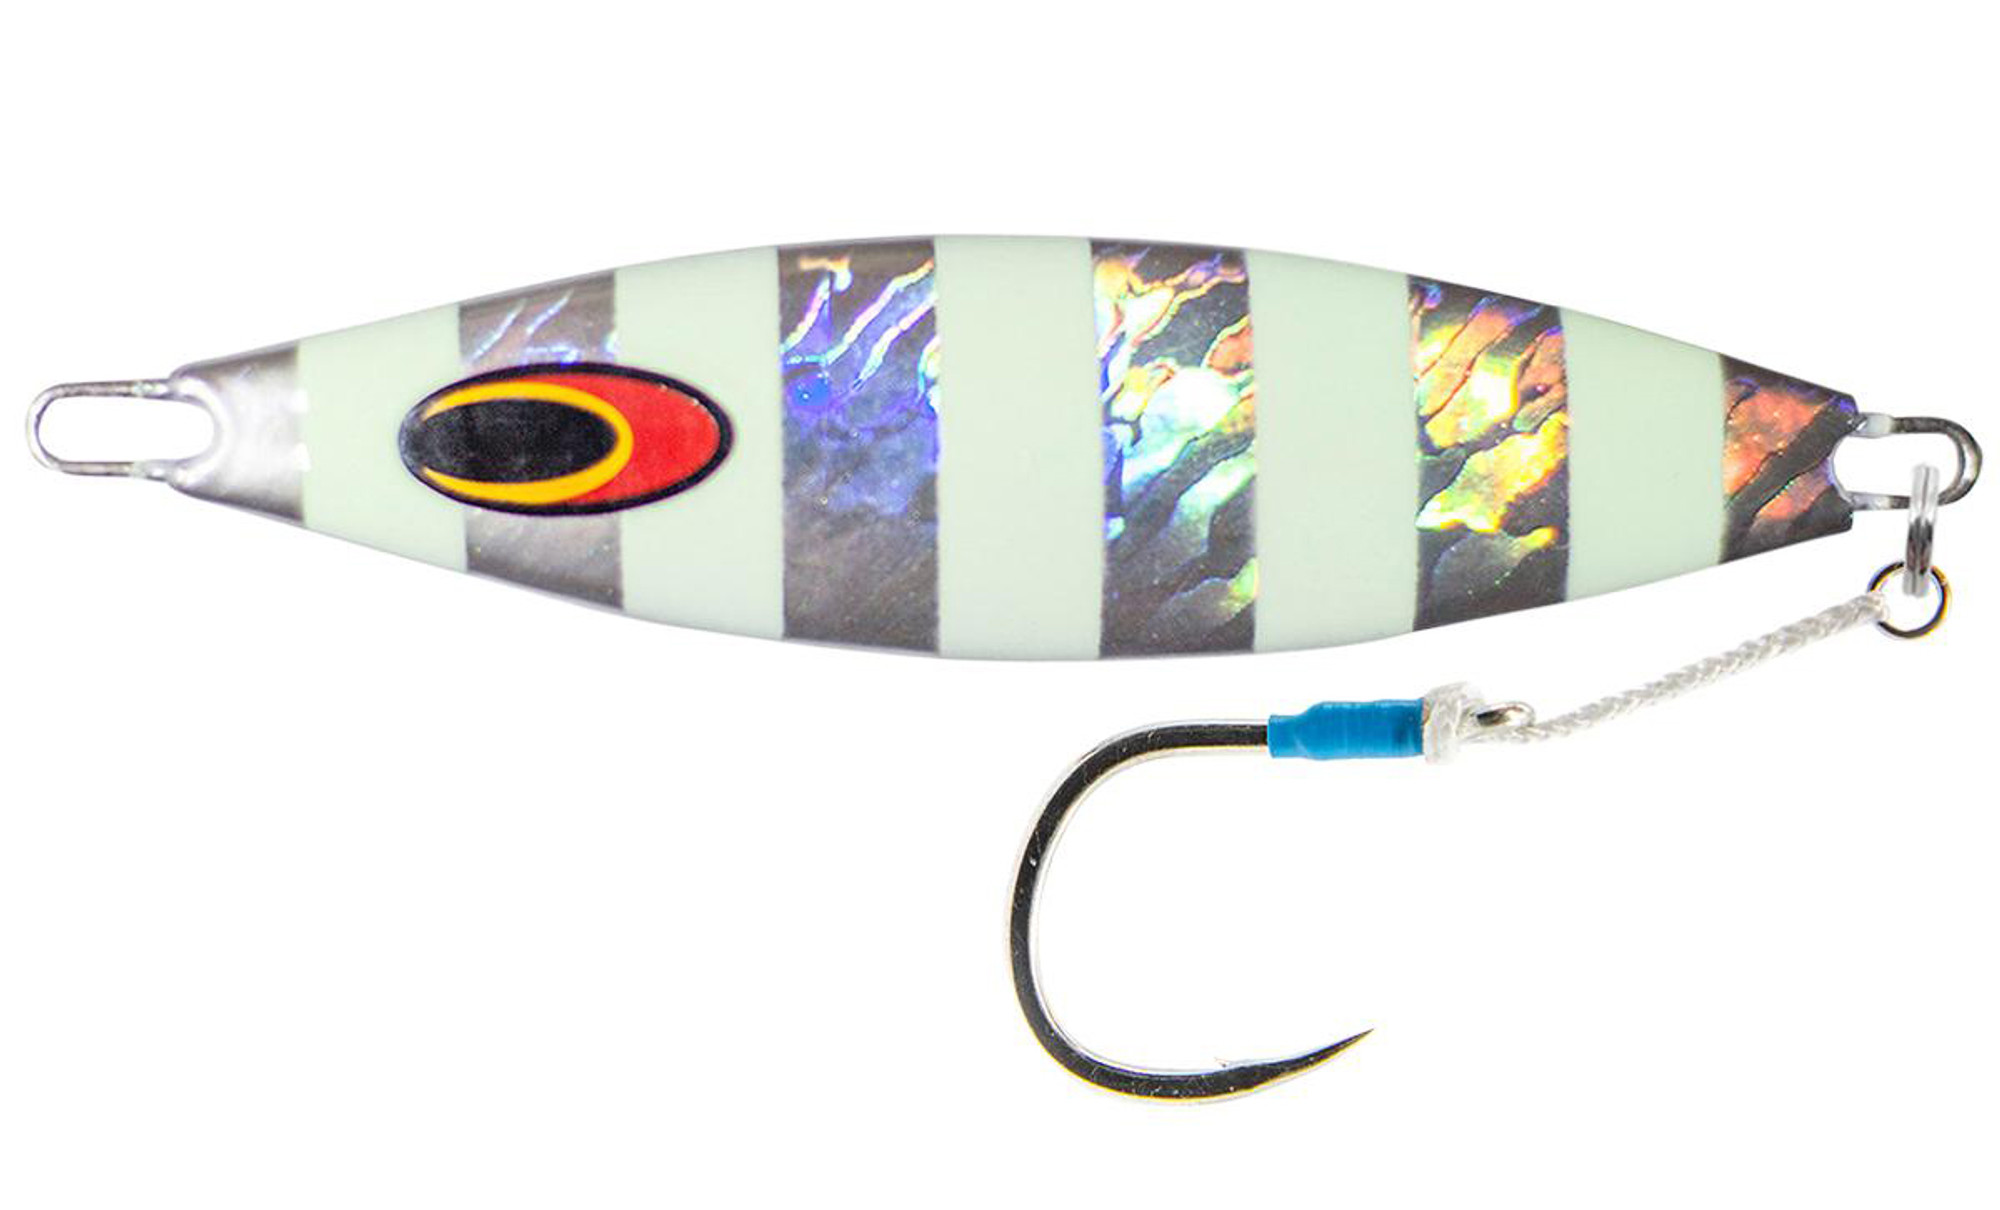 Nomad Design "The Buffalo" Slow Pitch Fishing Jig (Color: Silver Glow Stripe)